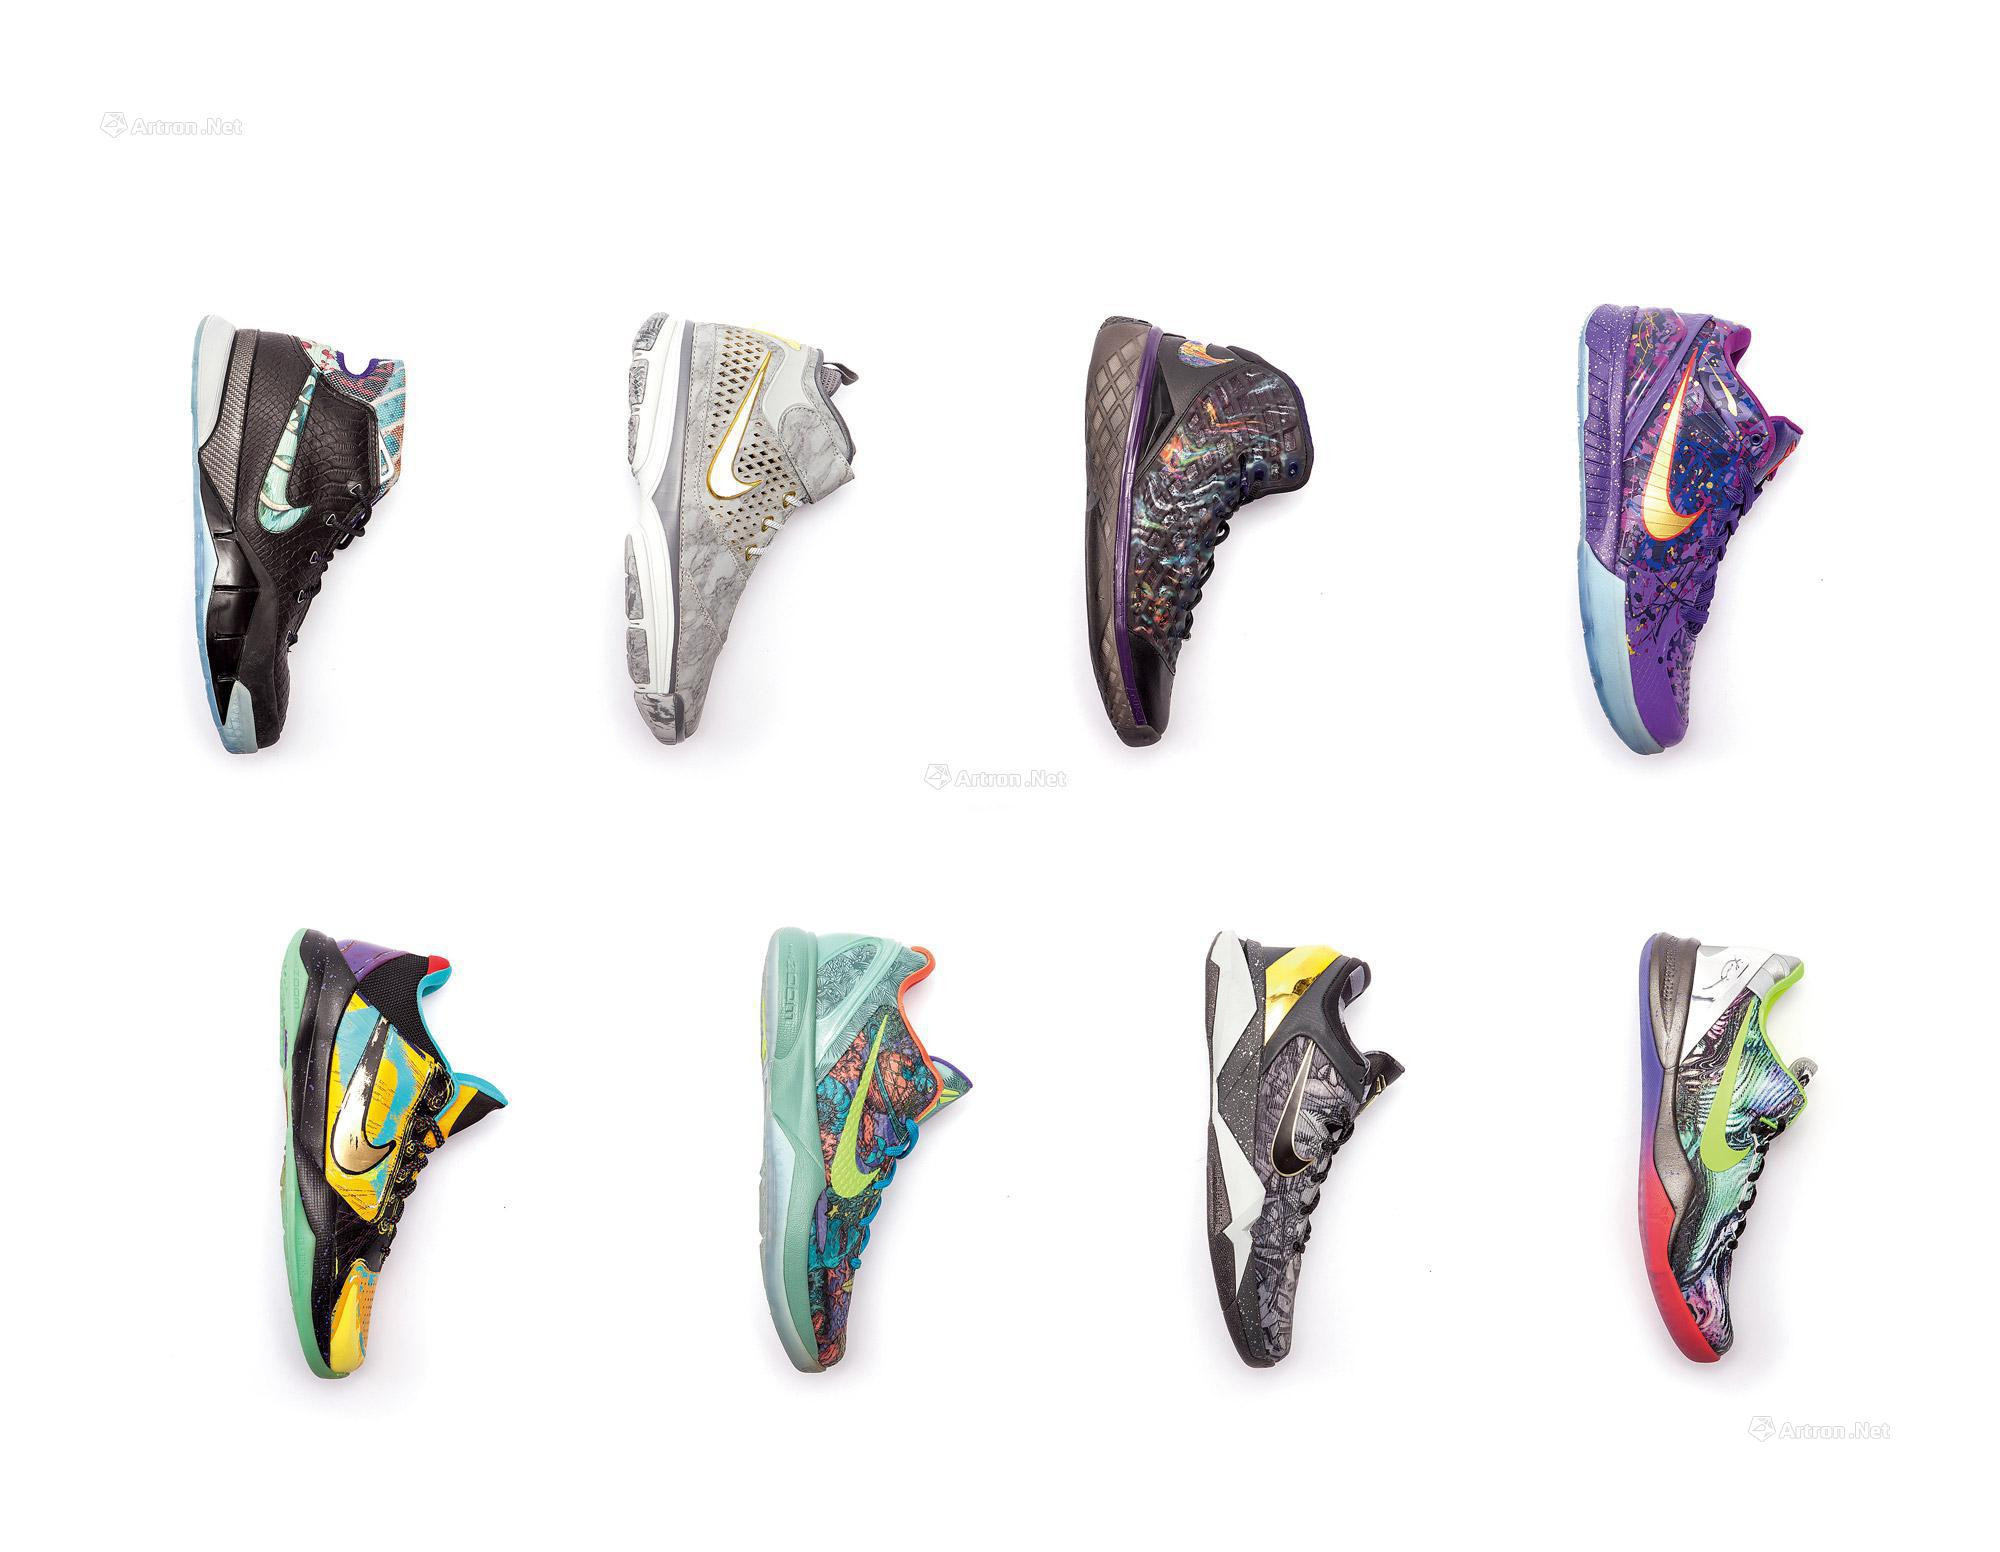 Kobe Prelude Sneaker Collection  8 Pairs of Player Exclusive Sneakers